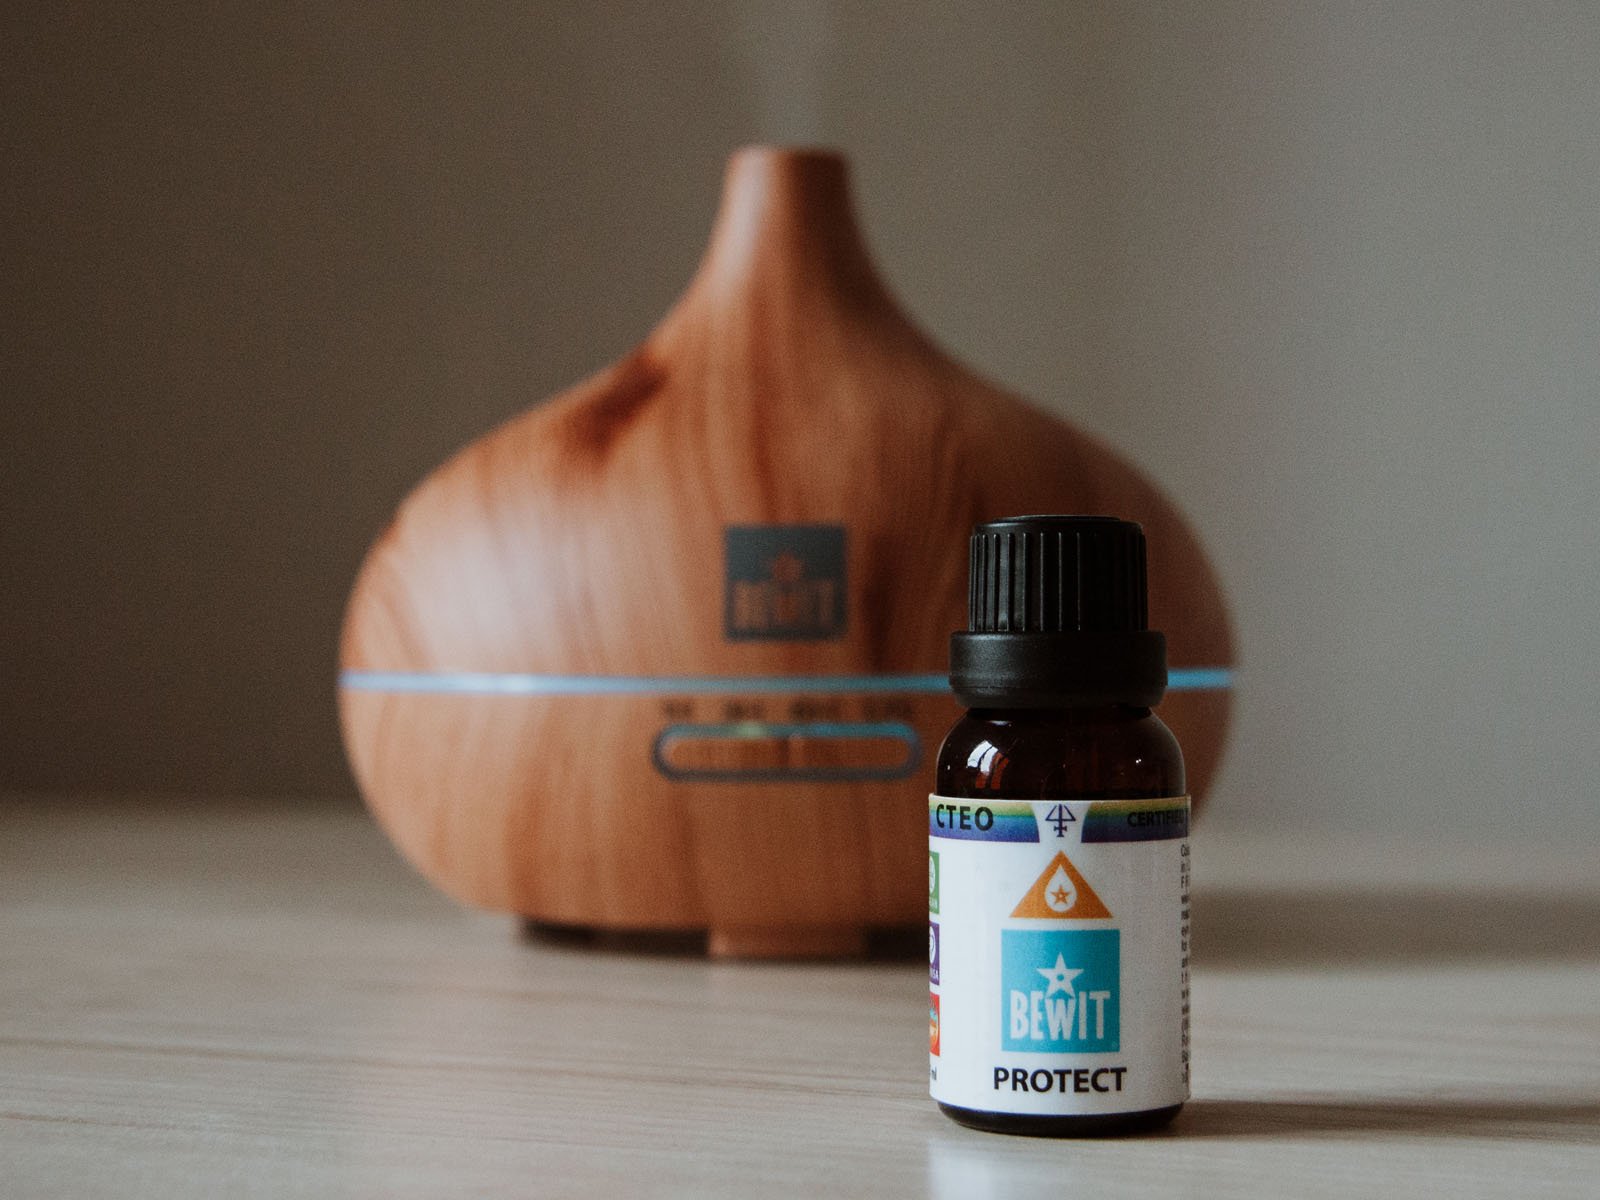 BEWIT PROTECT - A unique blend of the essential oils - 3